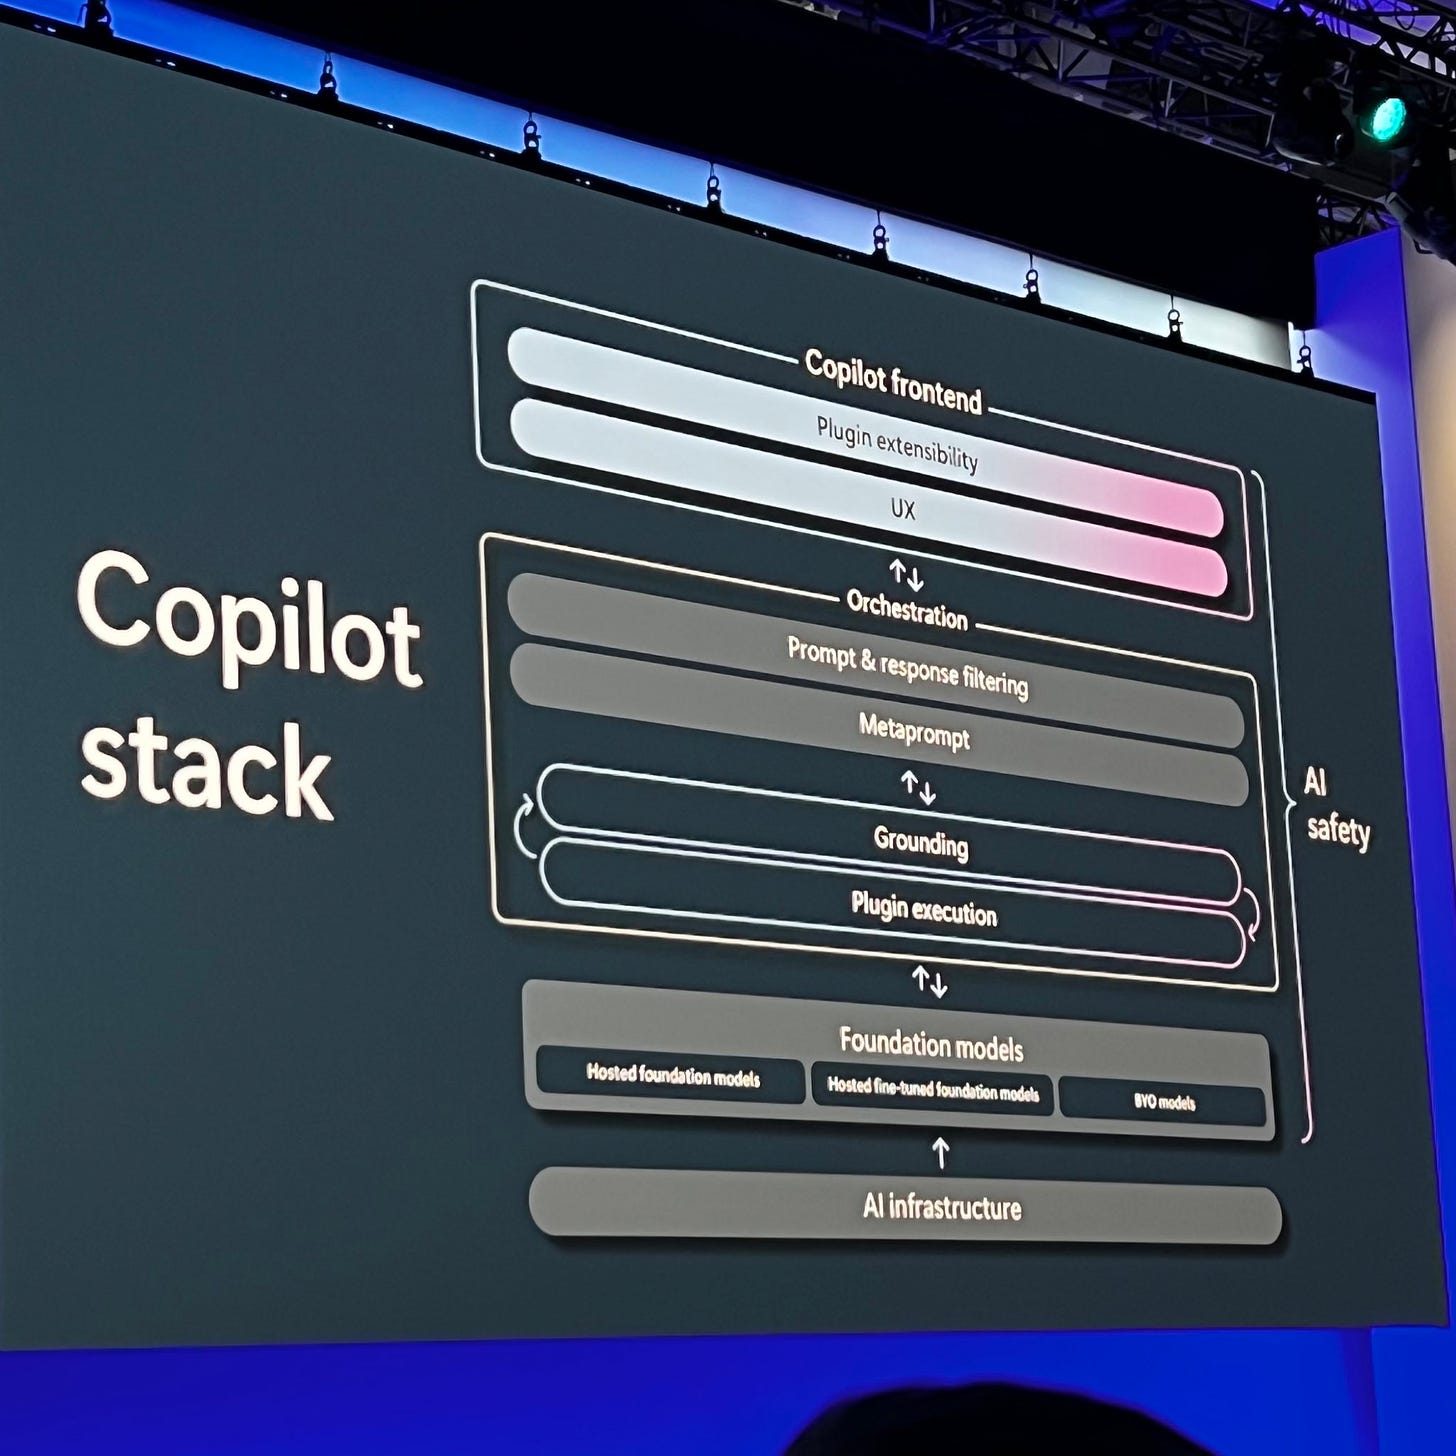 The Microsoft Copilot stack showcases the architecture design from infrastructure to models to orchestration to frontend.